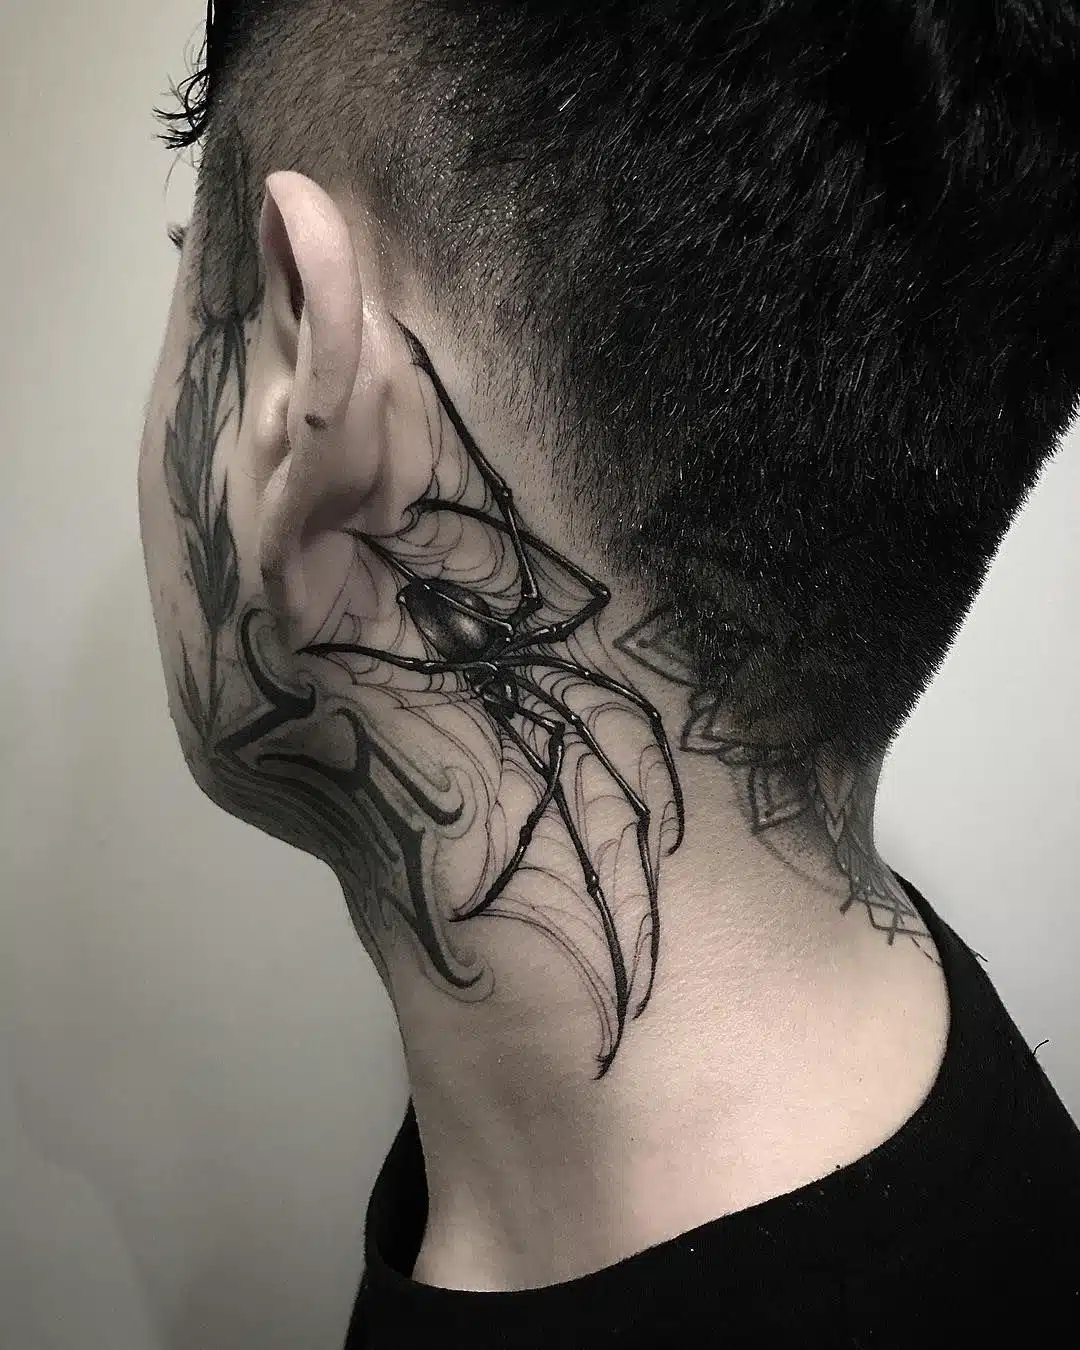 Behind the ear gothic tattoo